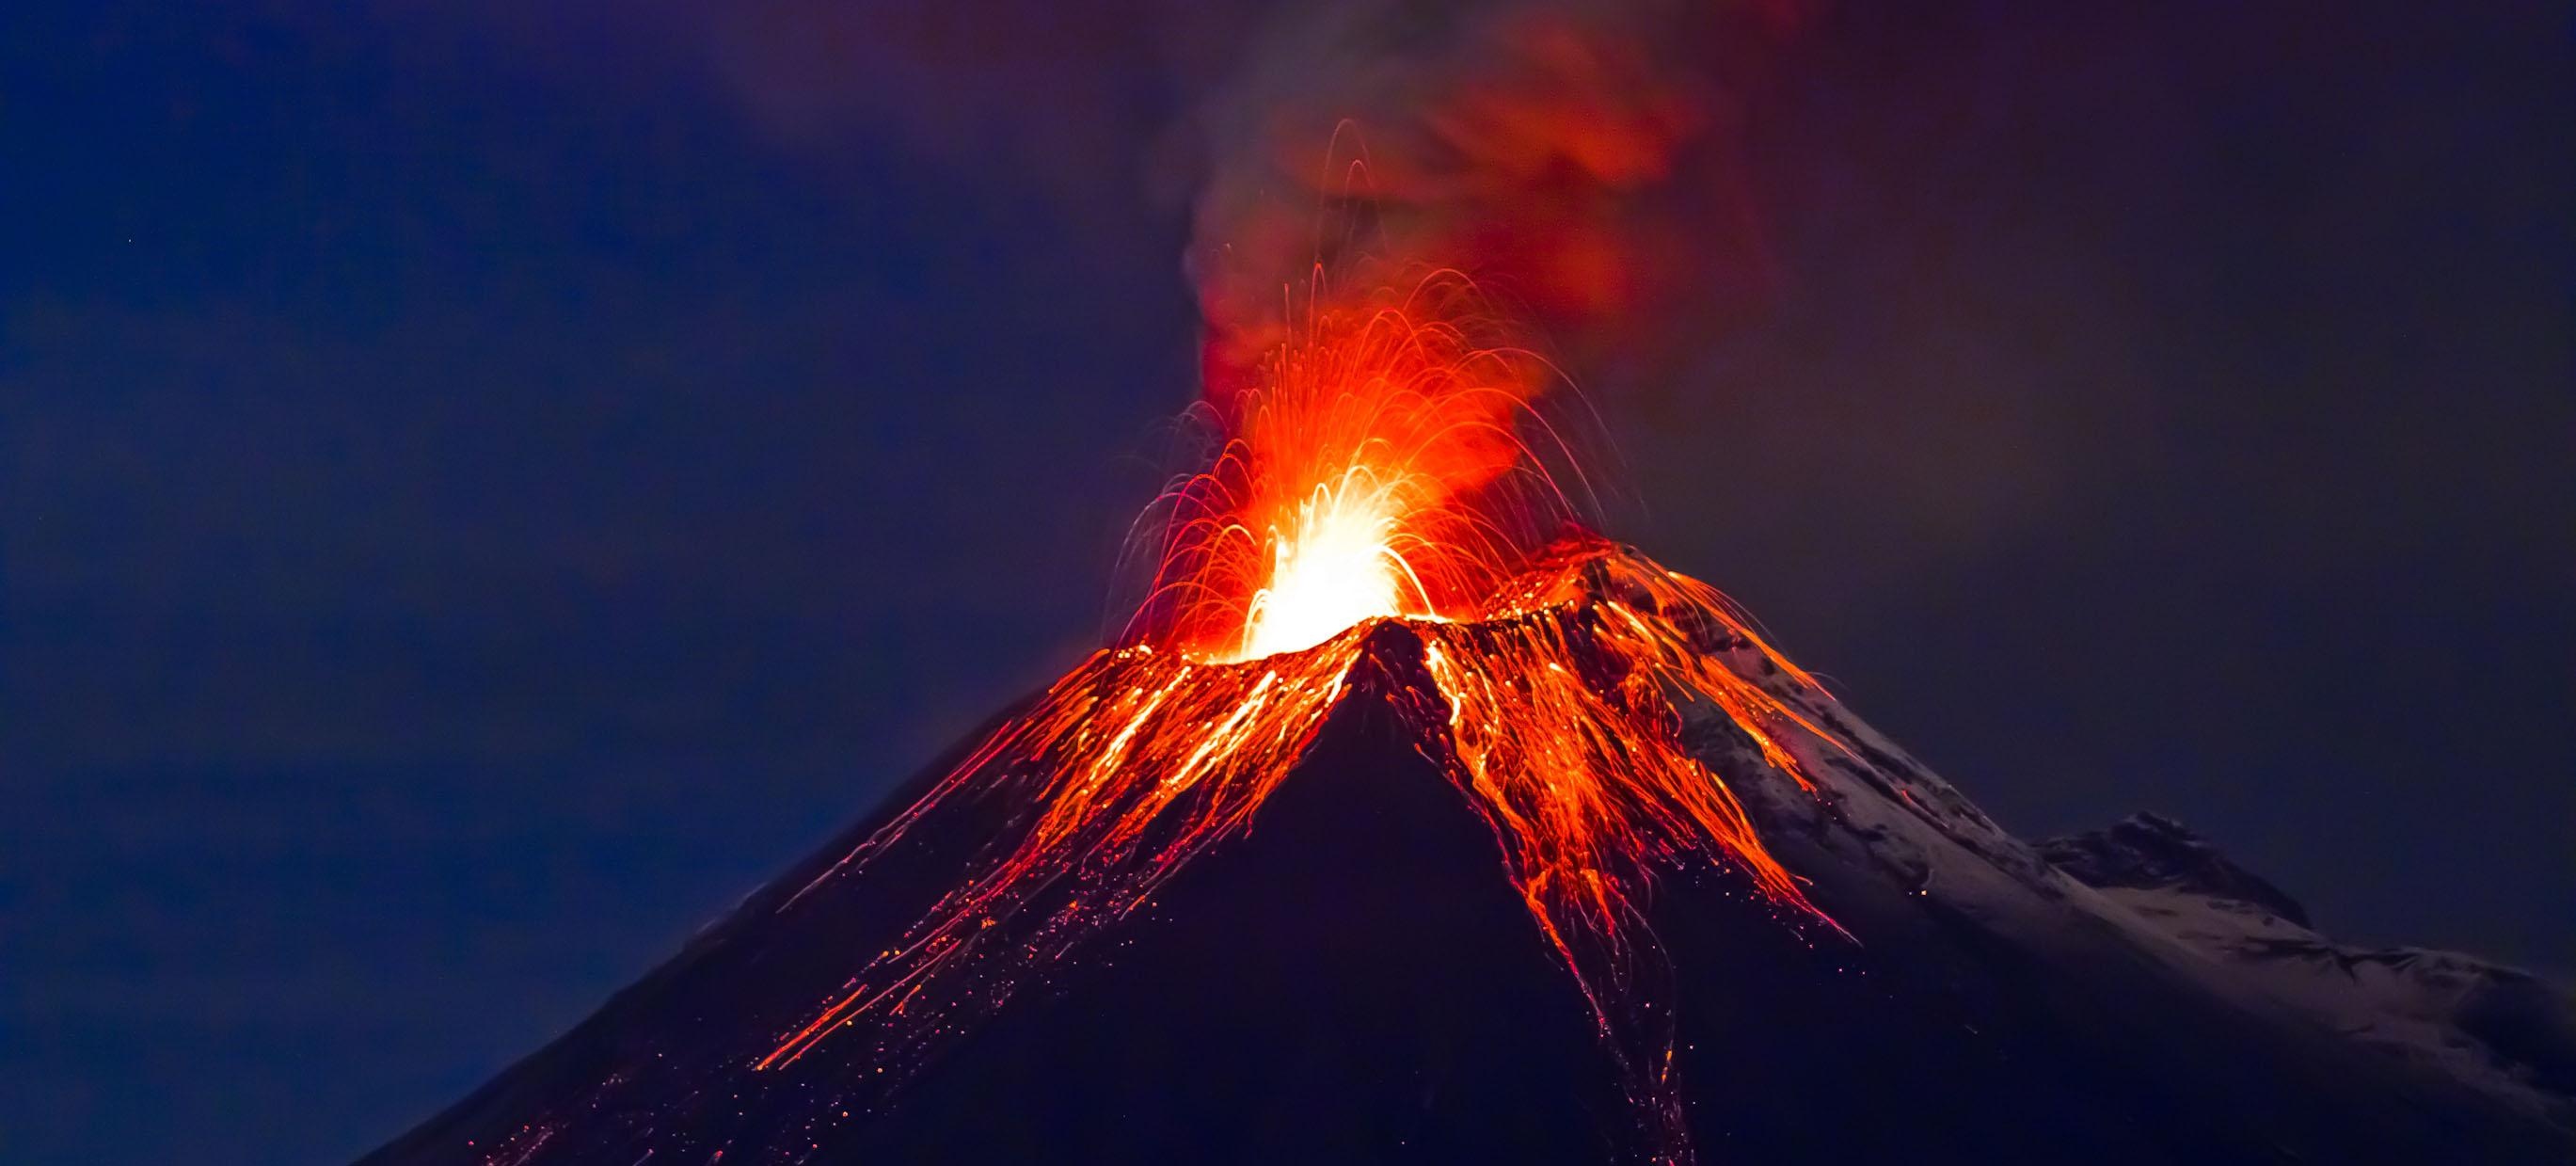 Intense volcanic energy, Active volcano, Nature's fiery force, Power of the earth, 2740x1240 Dual Screen Desktop